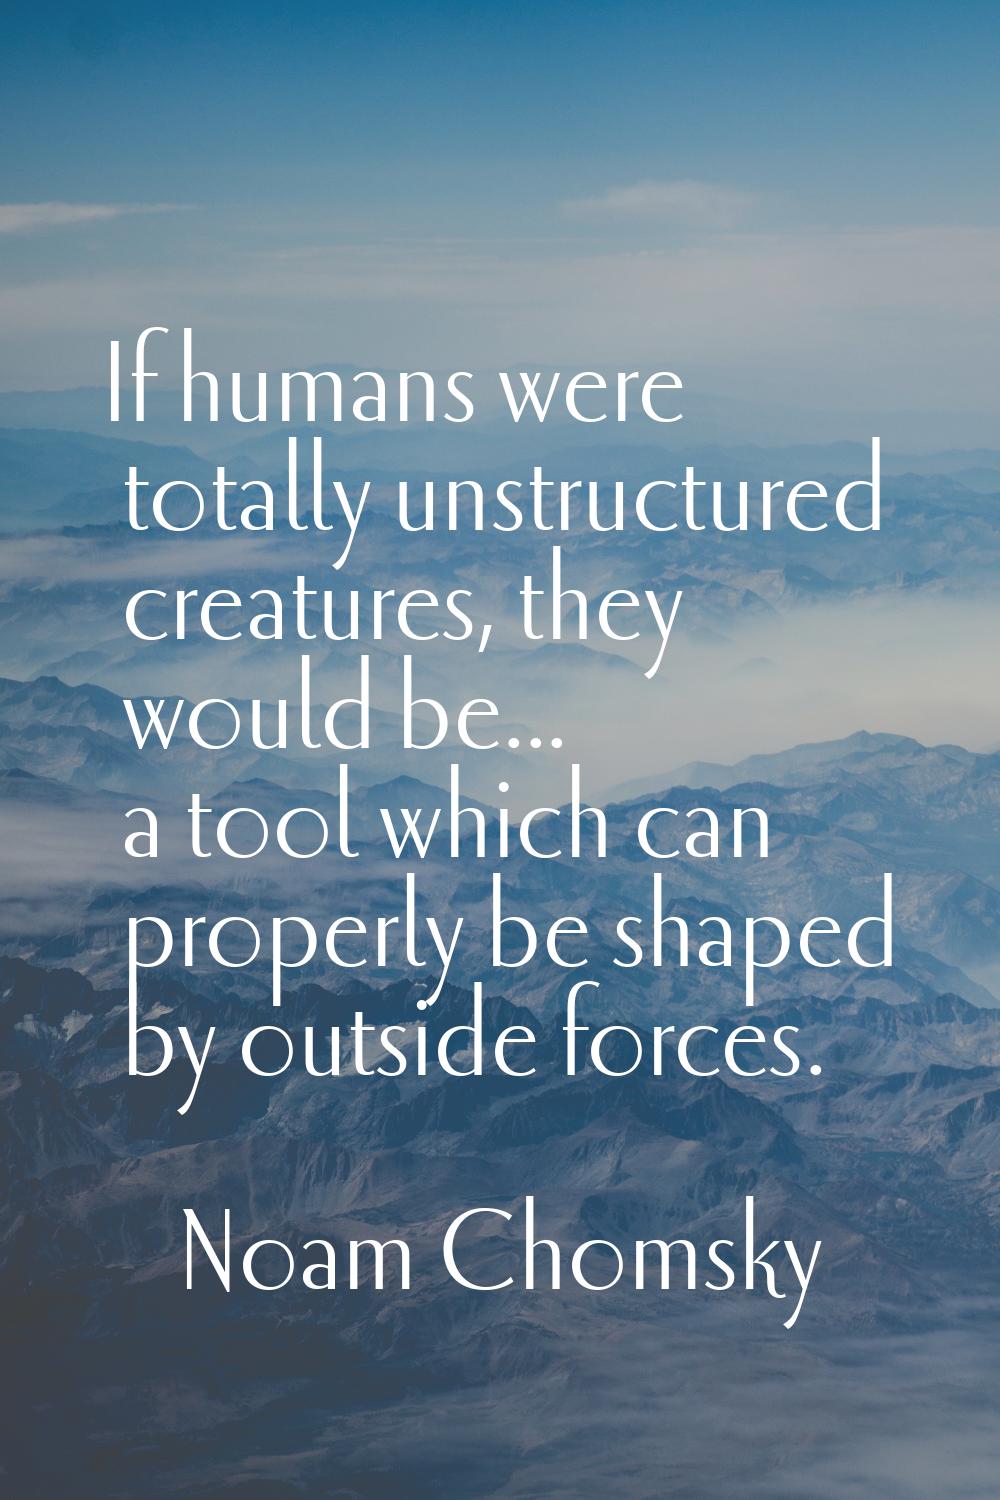 If humans were totally unstructured creatures, they would be... a tool which can properly be shaped